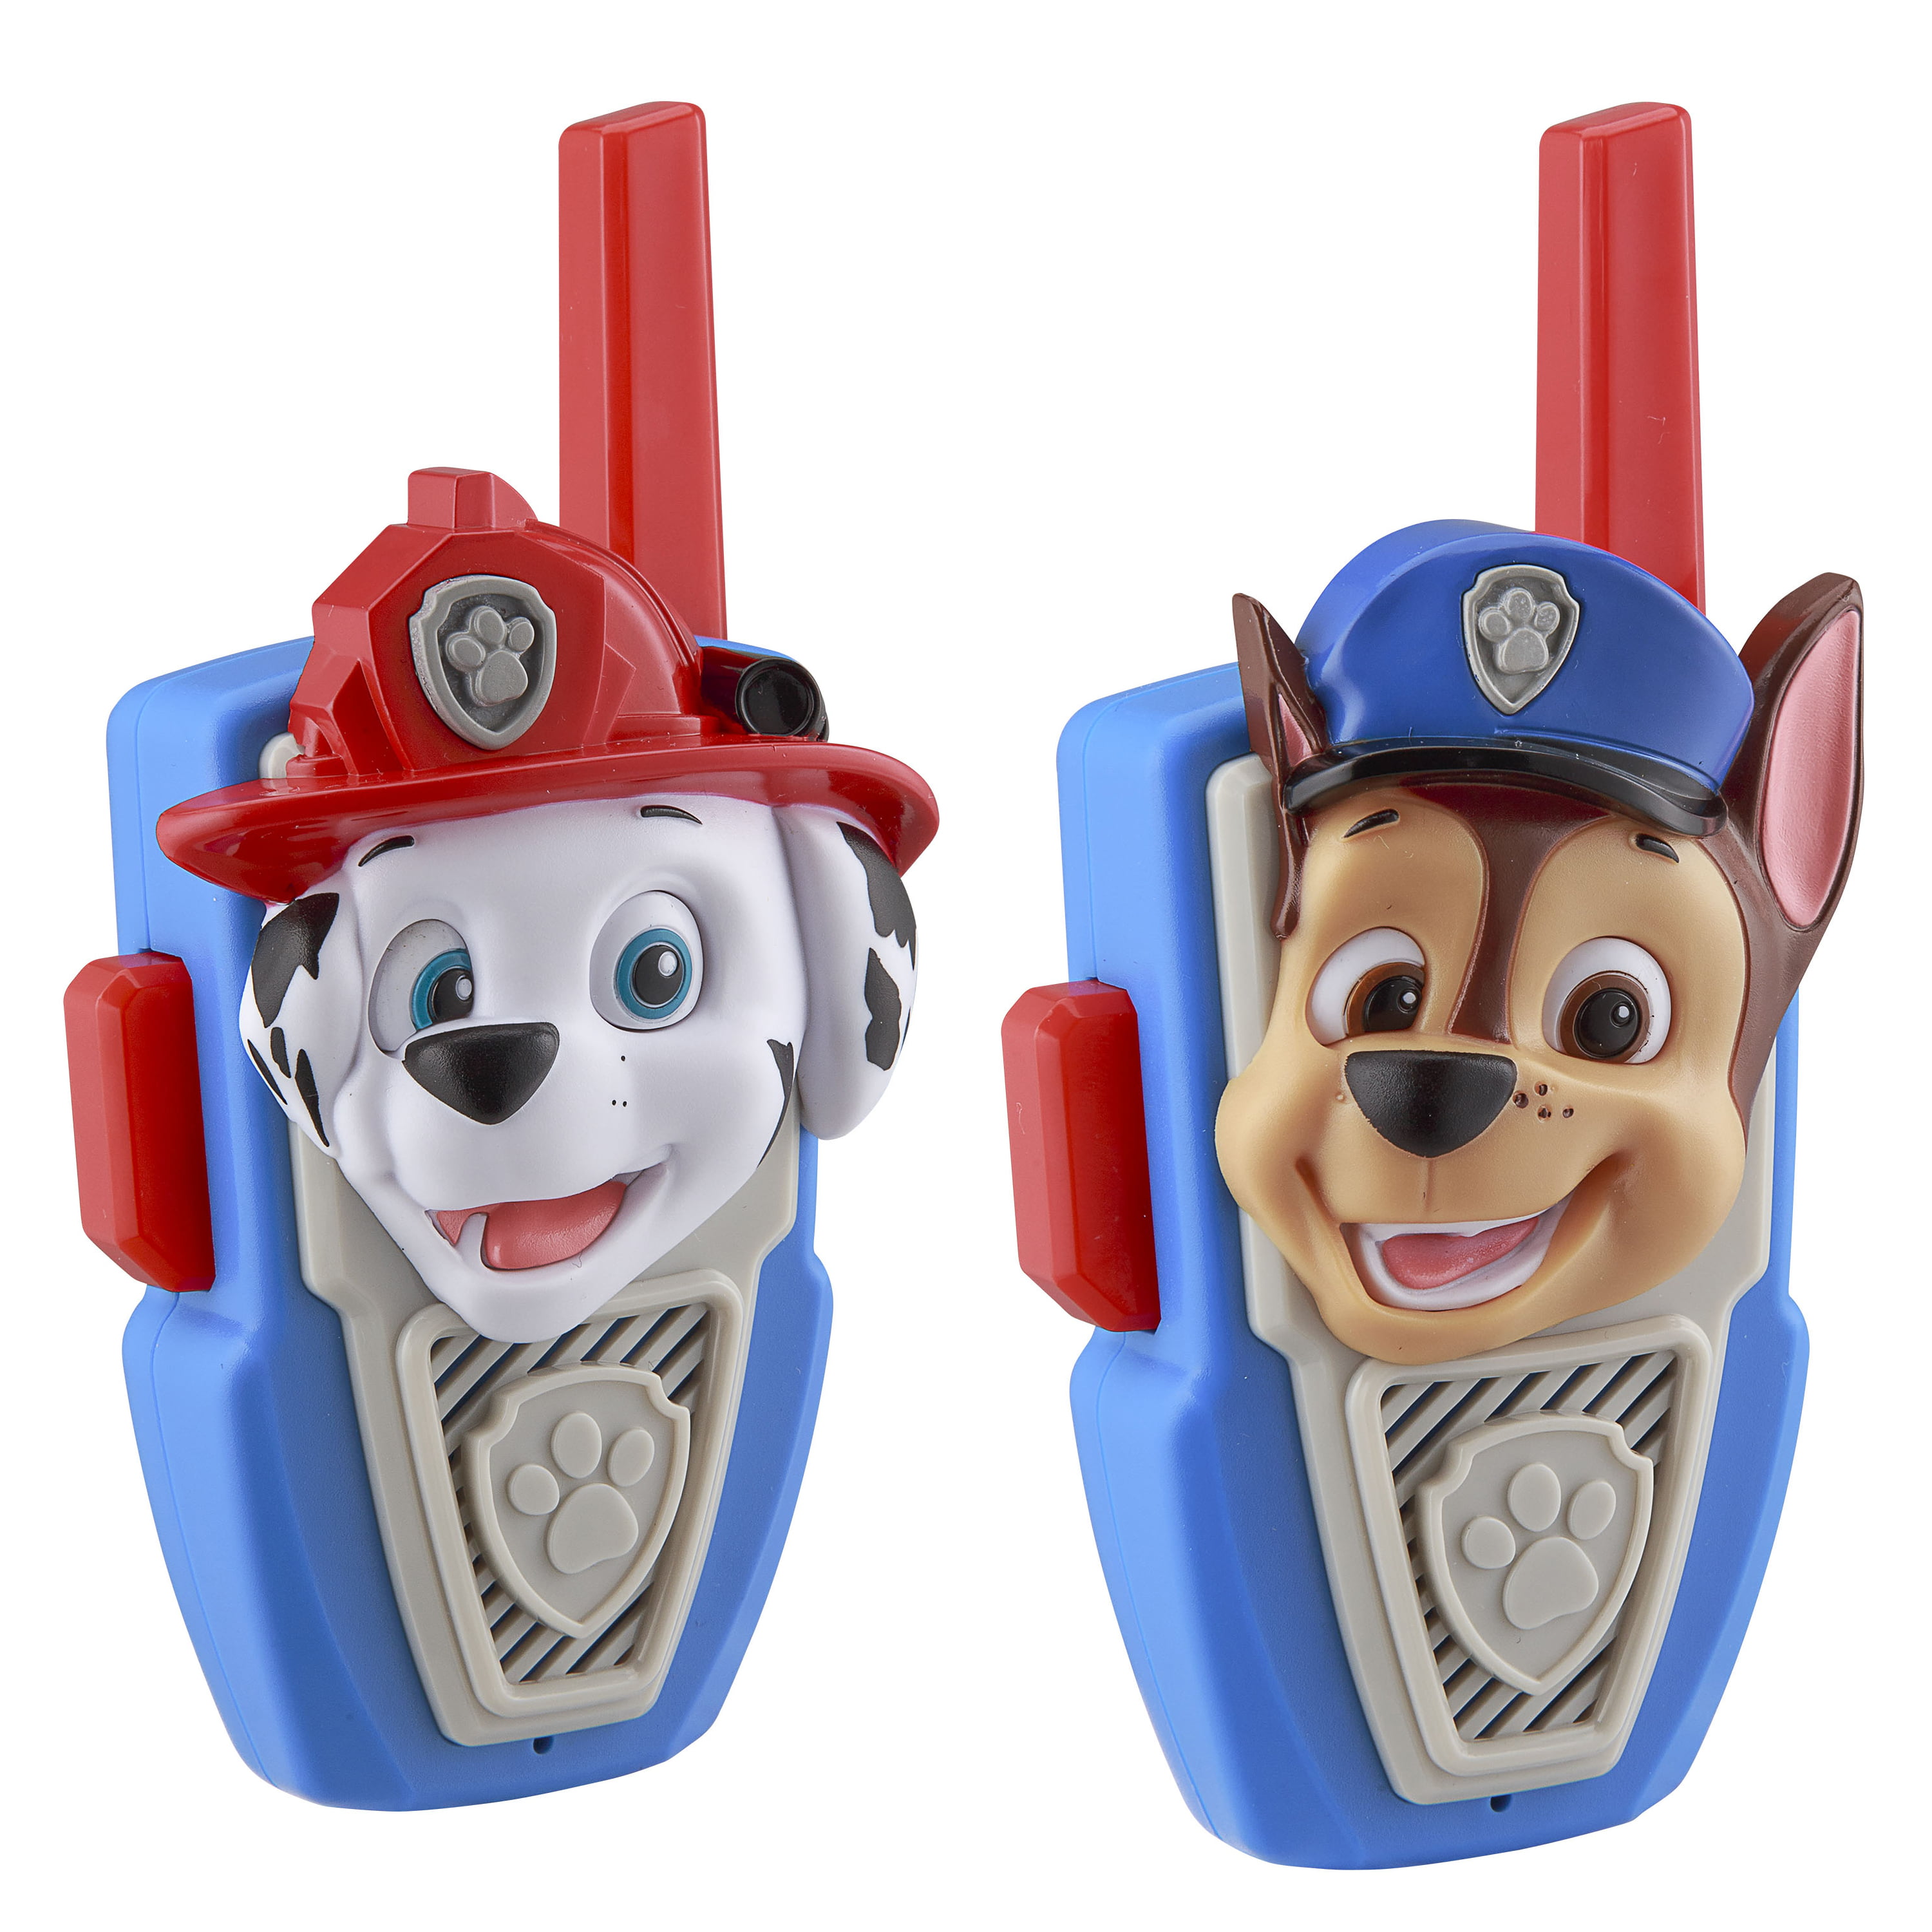 Paw Patrol Character Walkie Talkies for Kids With Extended Range and Free Adventures. - Walmart.com